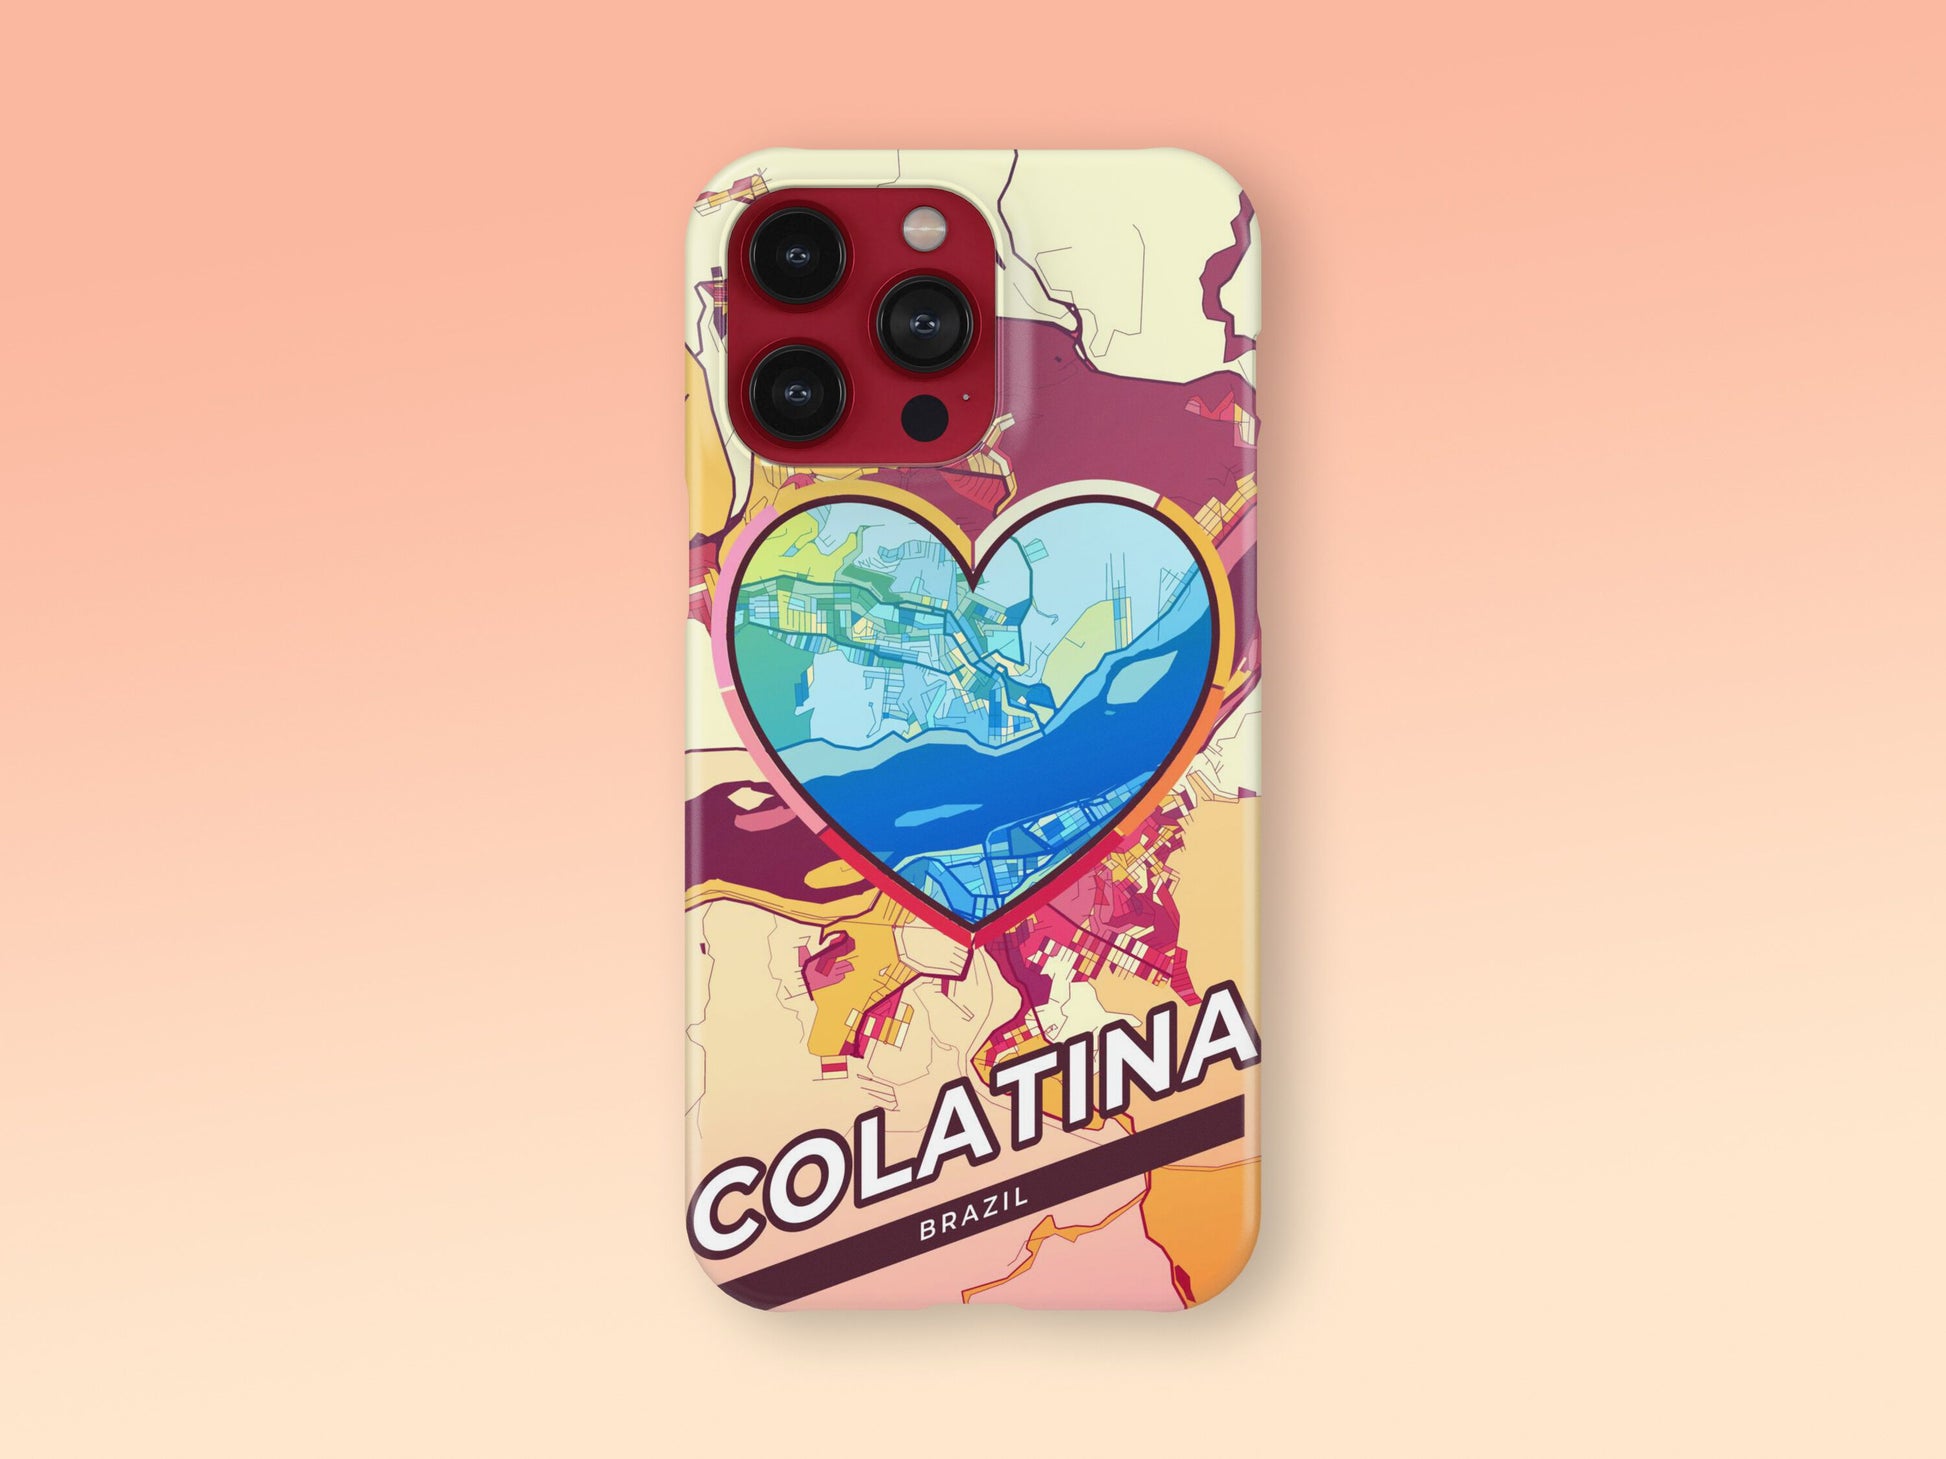 Colatina Brazil slim phone case with colorful icon. Birthday, wedding or housewarming gift. Couple match cases. 2